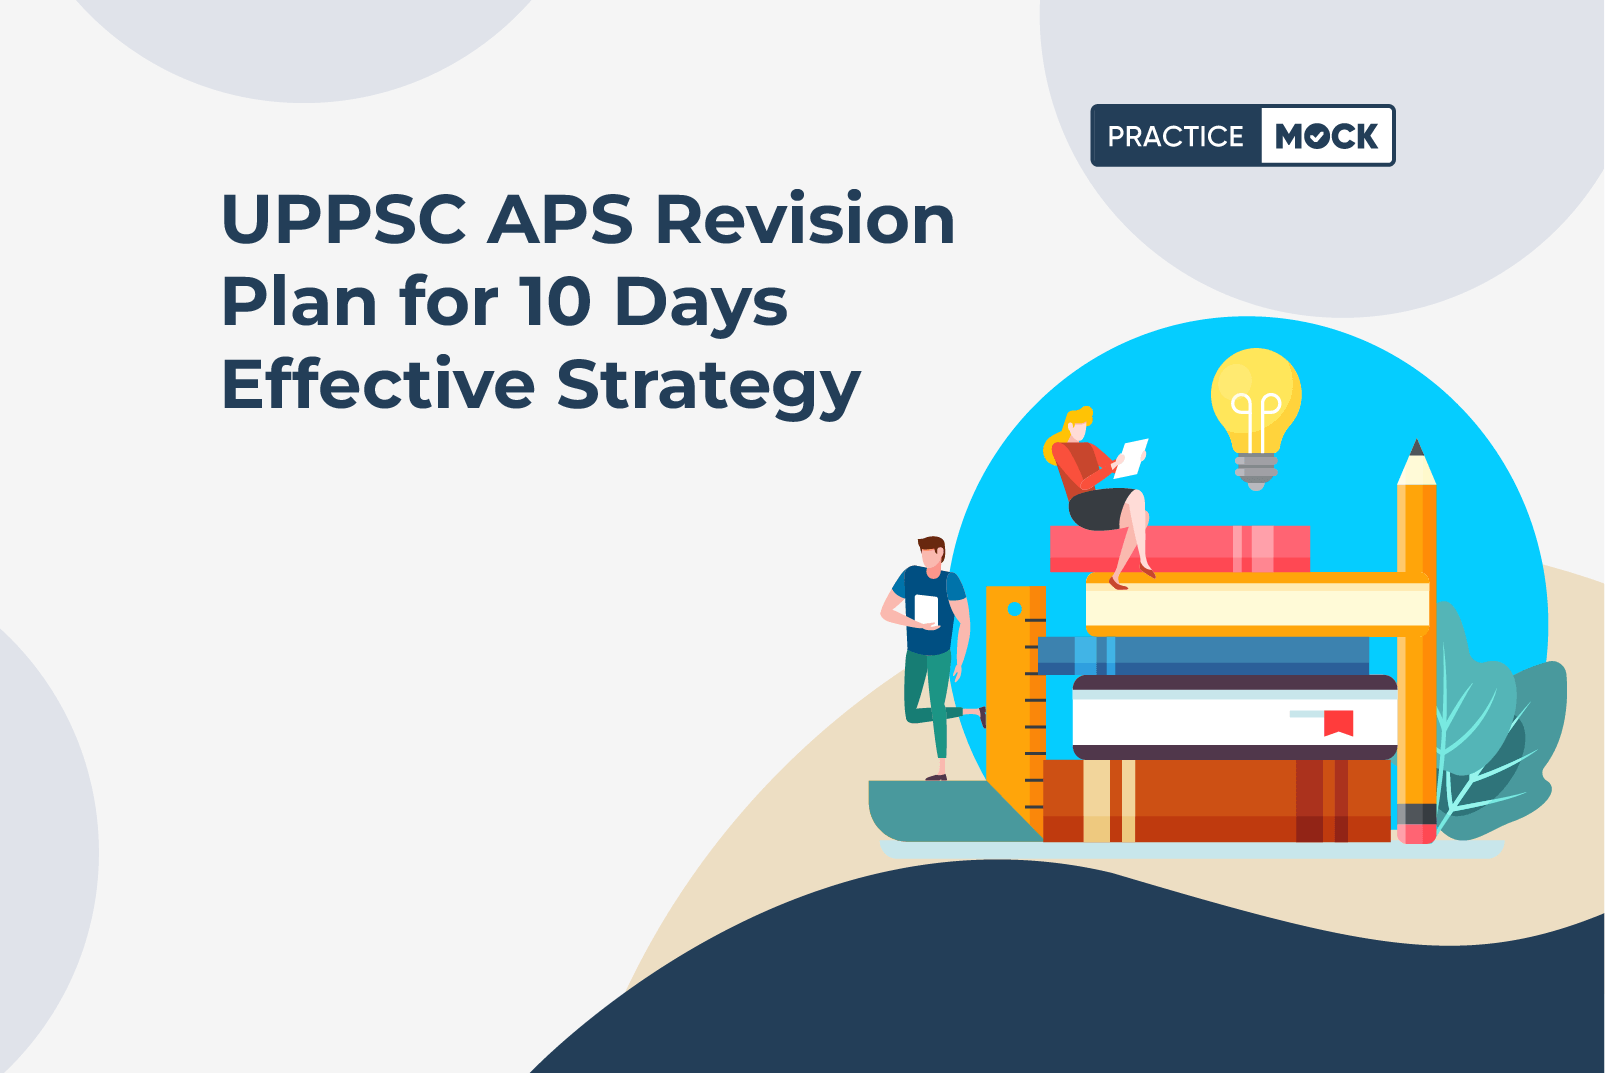 UPPSC APS Revision Plan for 10 Days Effective Strategy